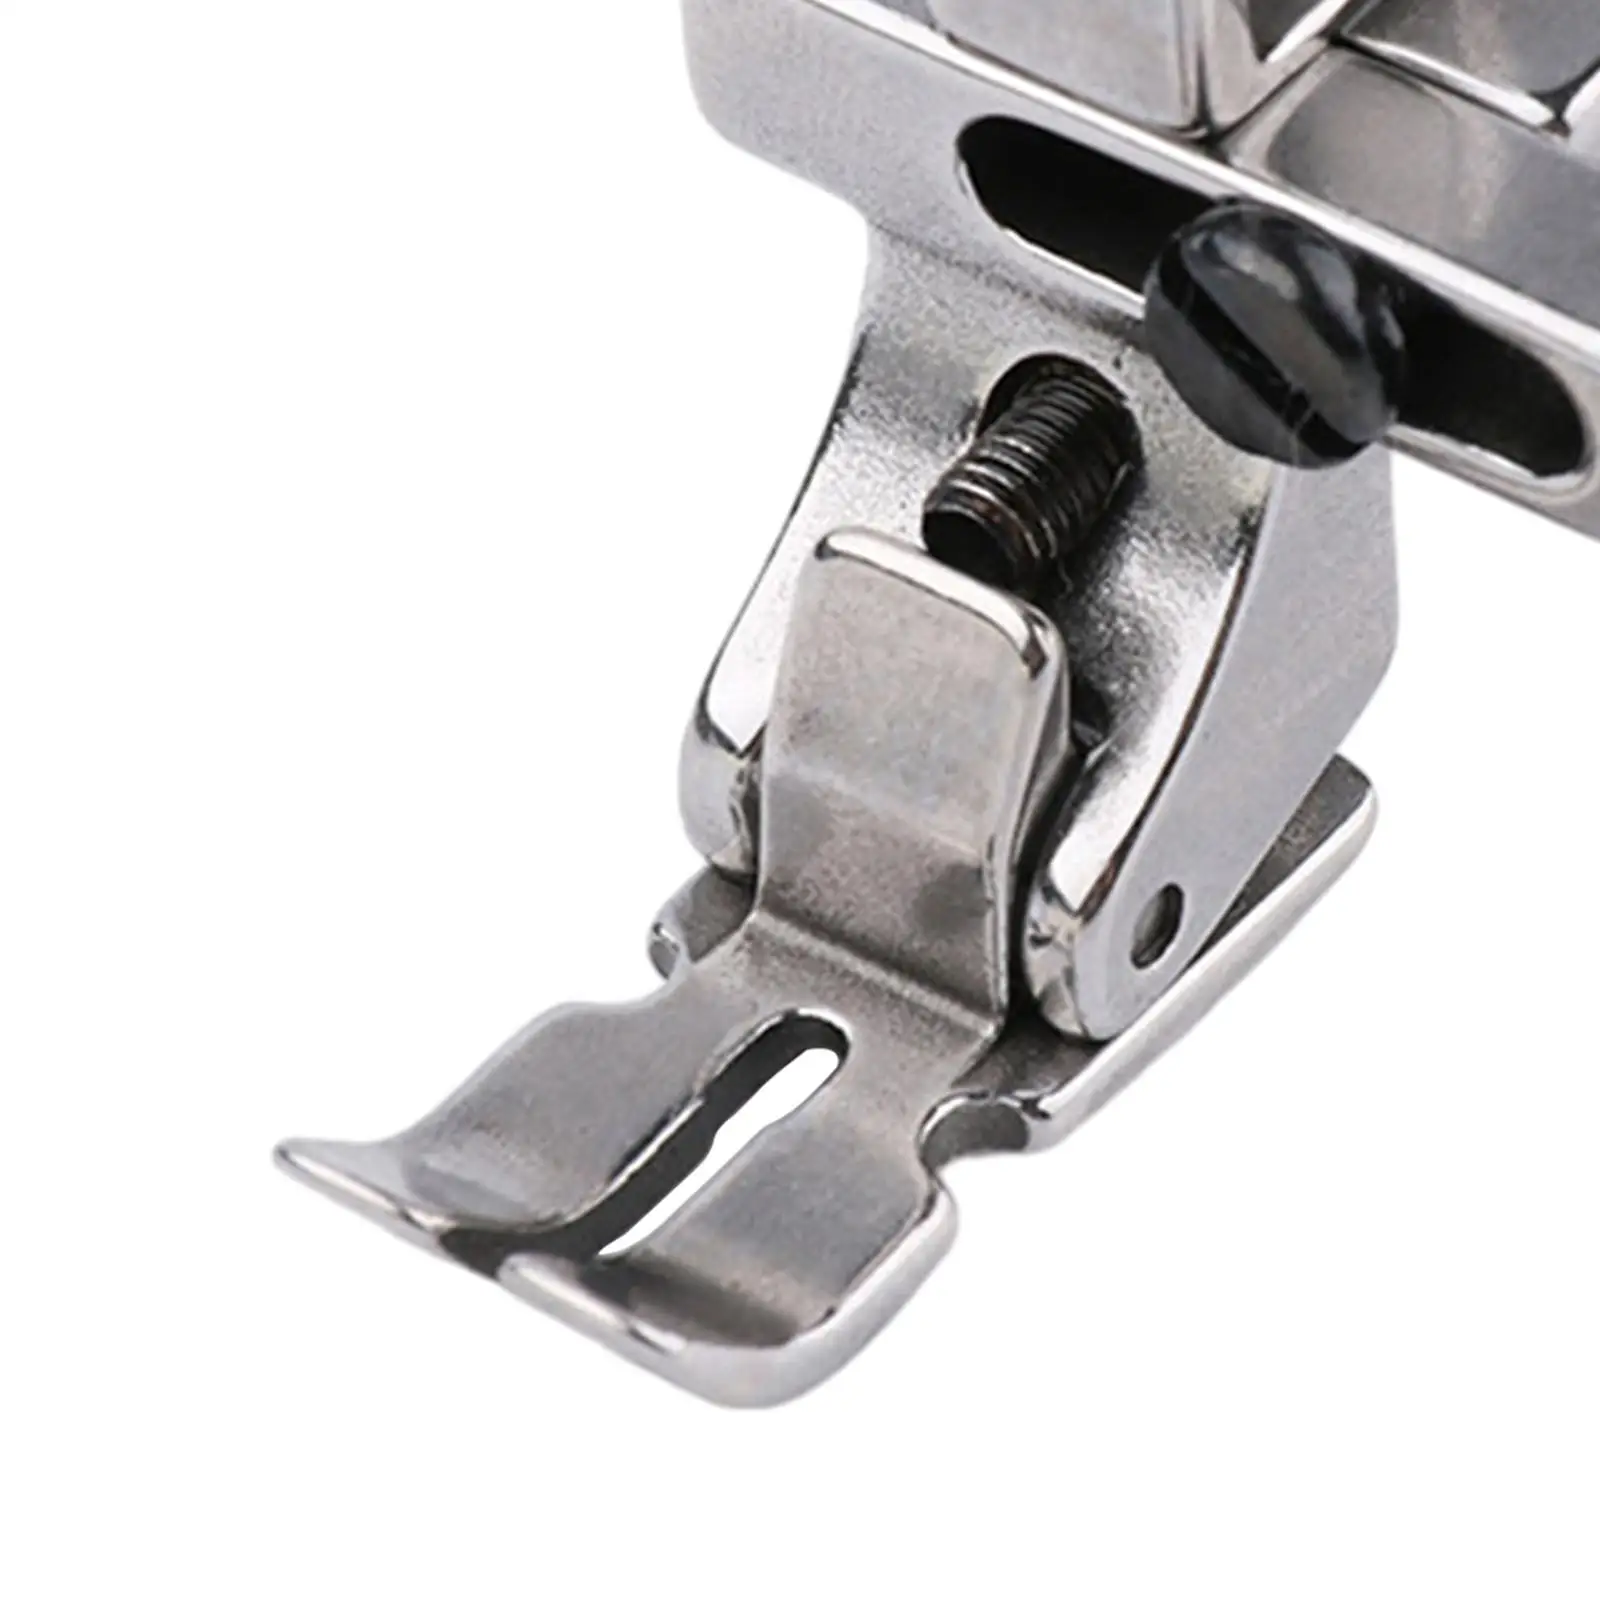 Presser Foot 4 in 1 Folding Position Adjustable Edge Guide Foot Hem Foot Parts for Flat Car Stitching Overlock DIY Crafts Fabric